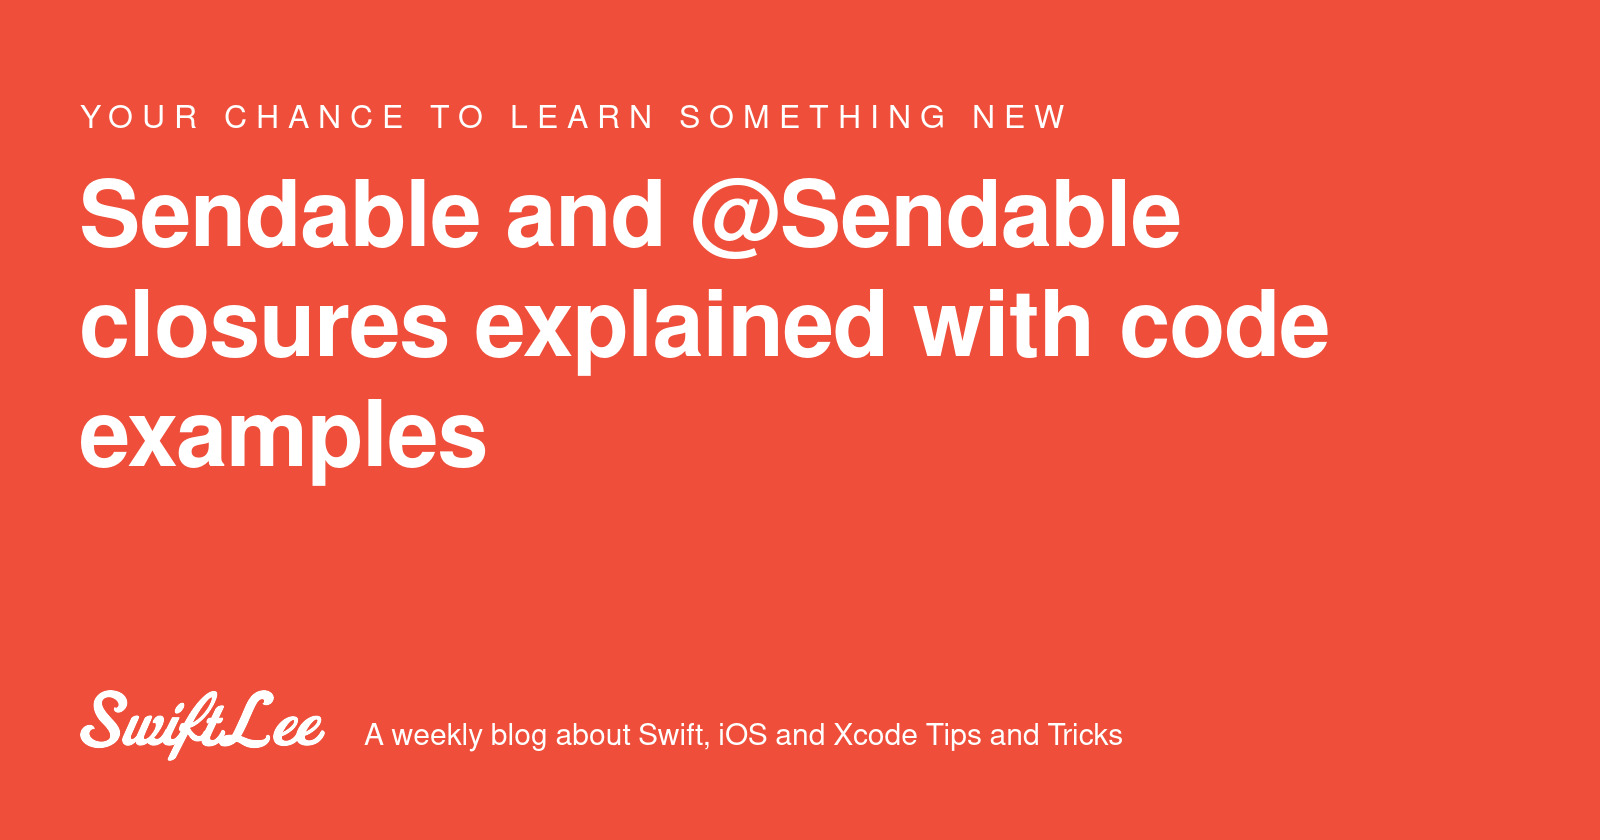 Sendable and @Sendable closures explained with code examples